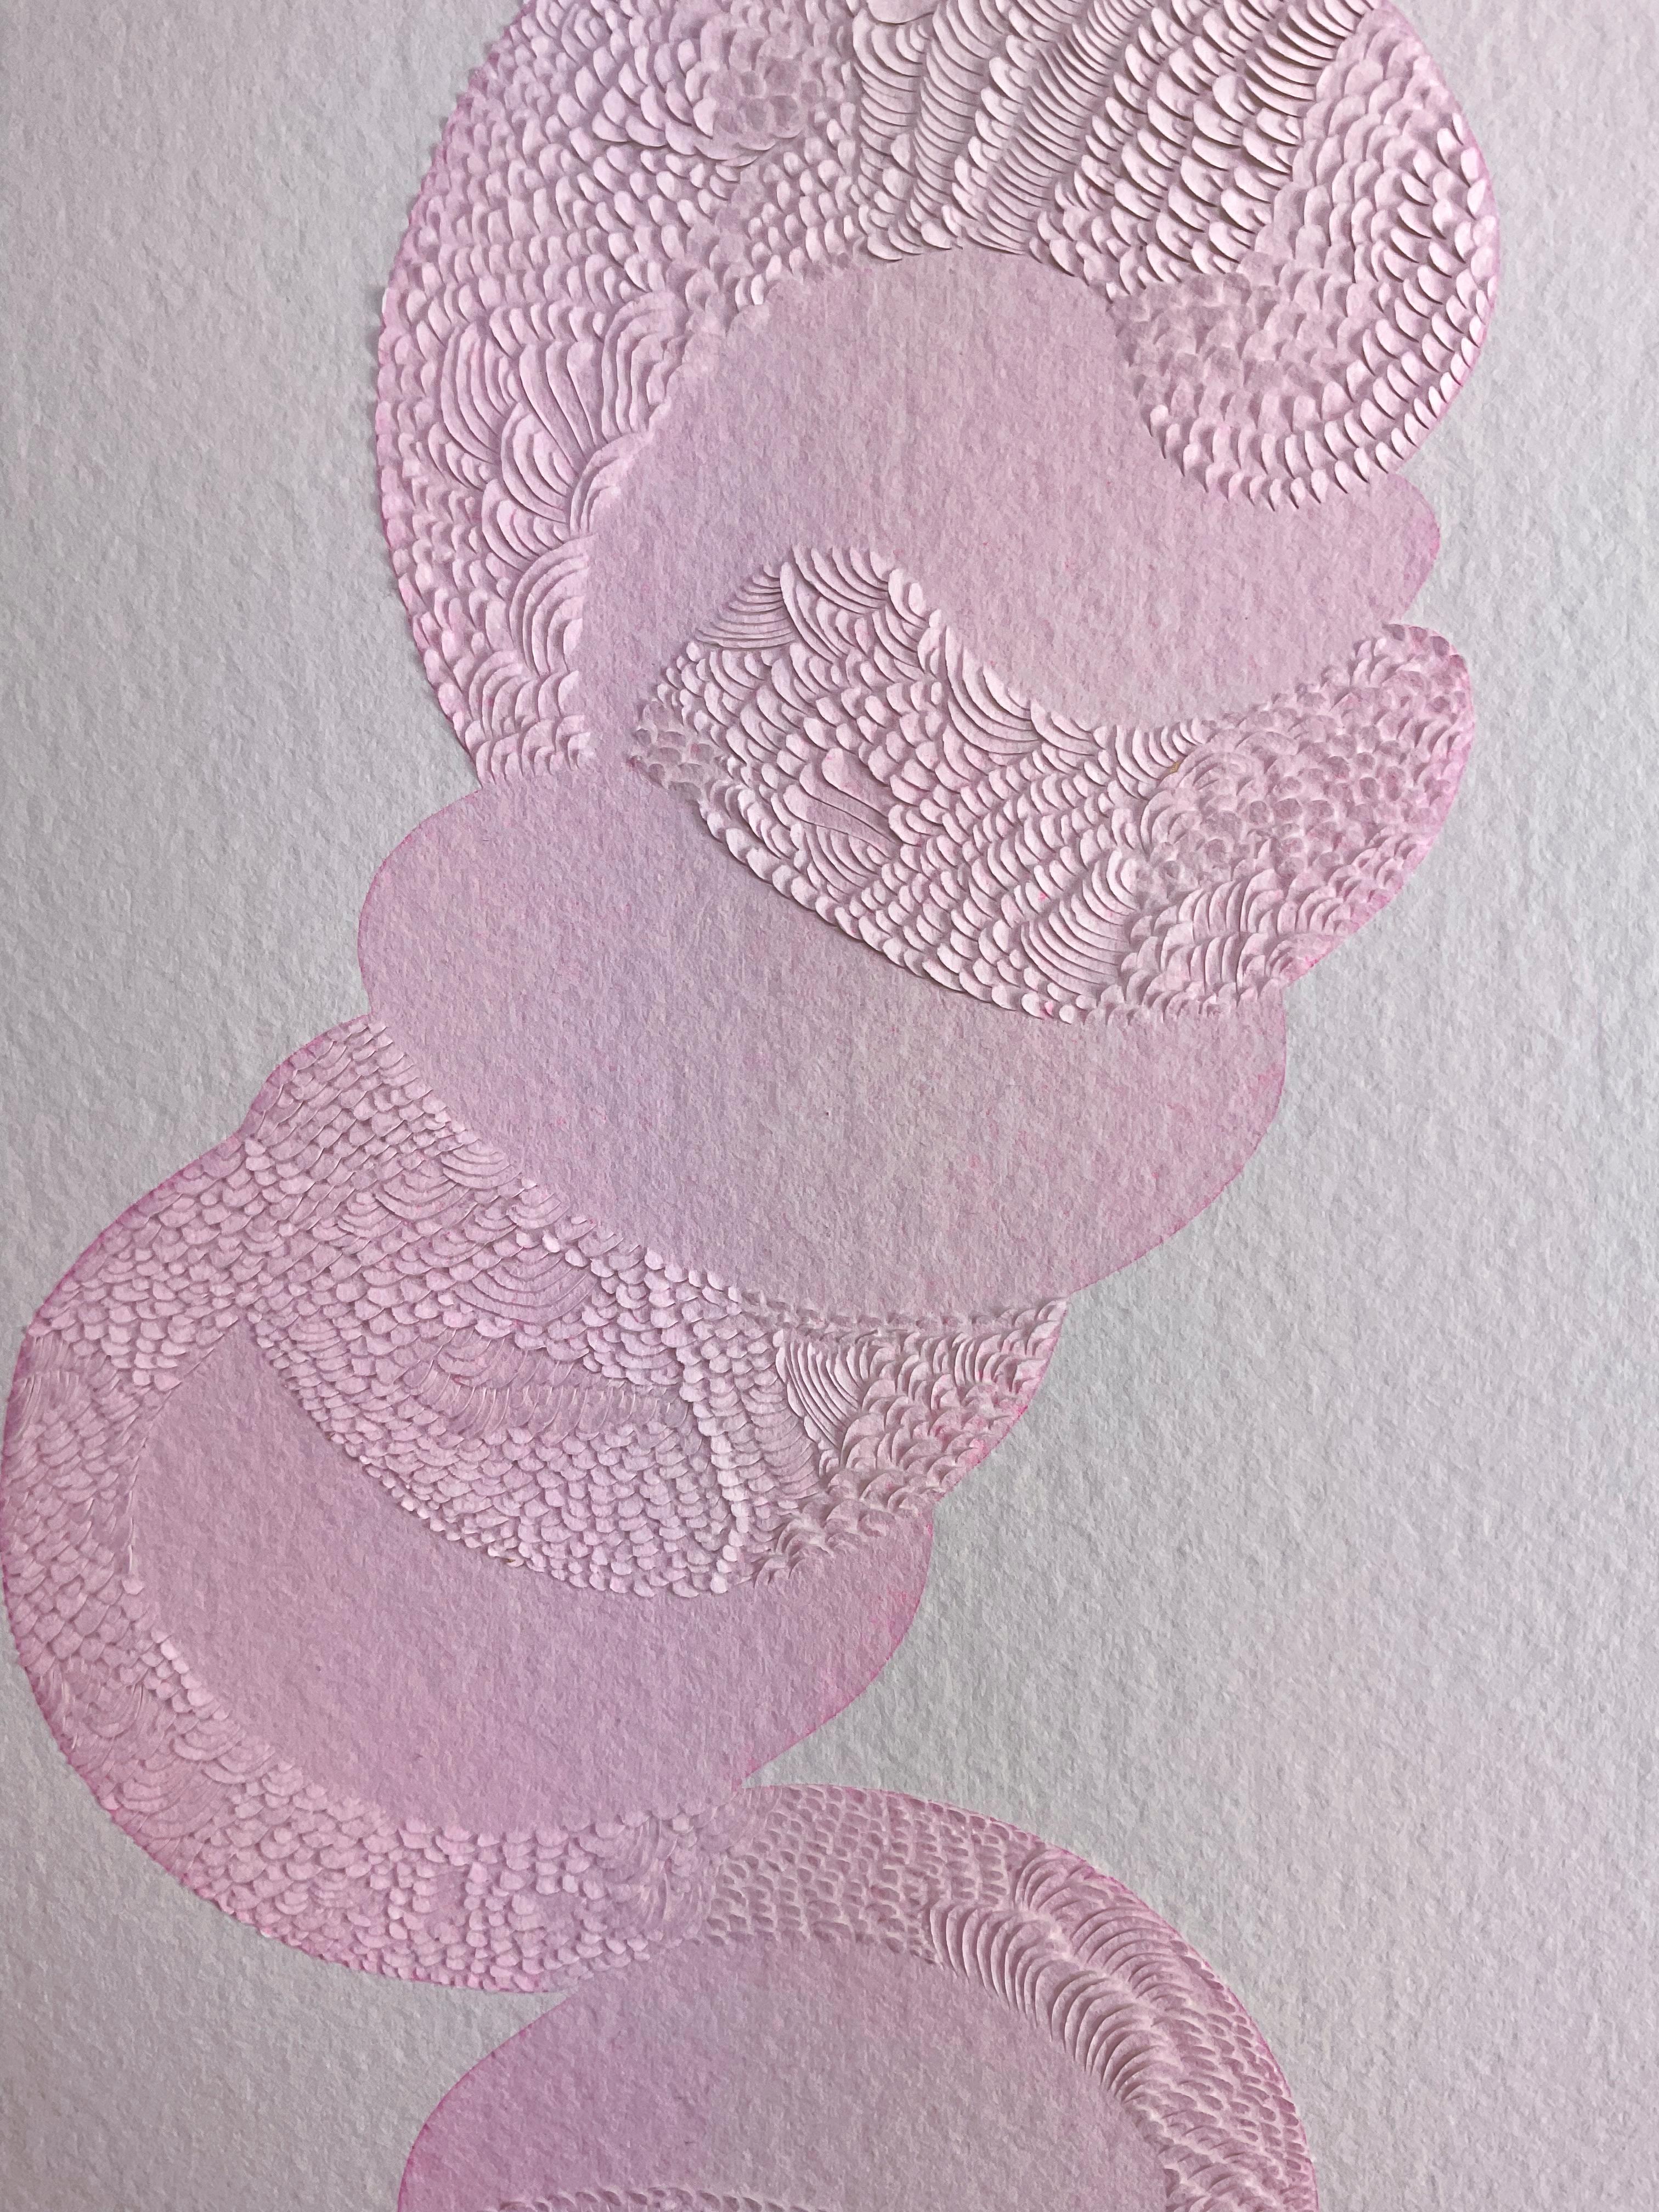 Knife Drawing VII -  Beautiful Textured Painting with Stunning Detail (Pink) - Gray Abstract Drawing by Lucha Rodriguez